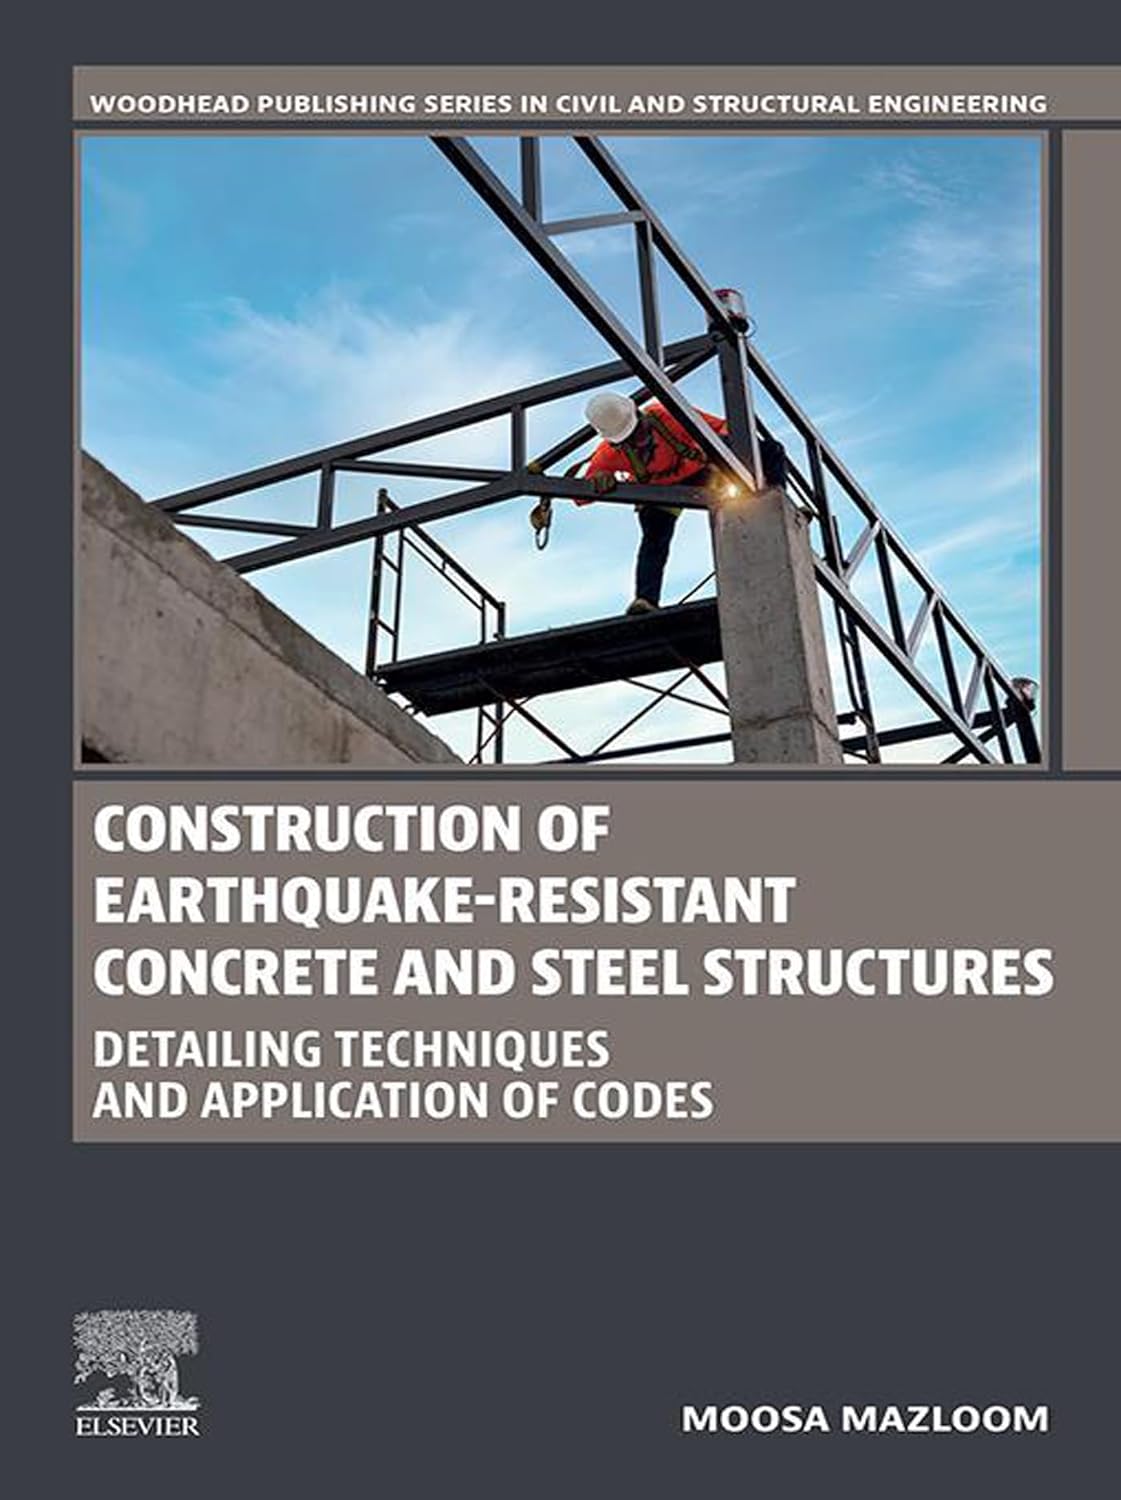 (EBook PDF)Construction of Earthquake-Resistant Concrete and Steel Structures Detailing Techniques and Application of Codes by  Moosa Mazloom